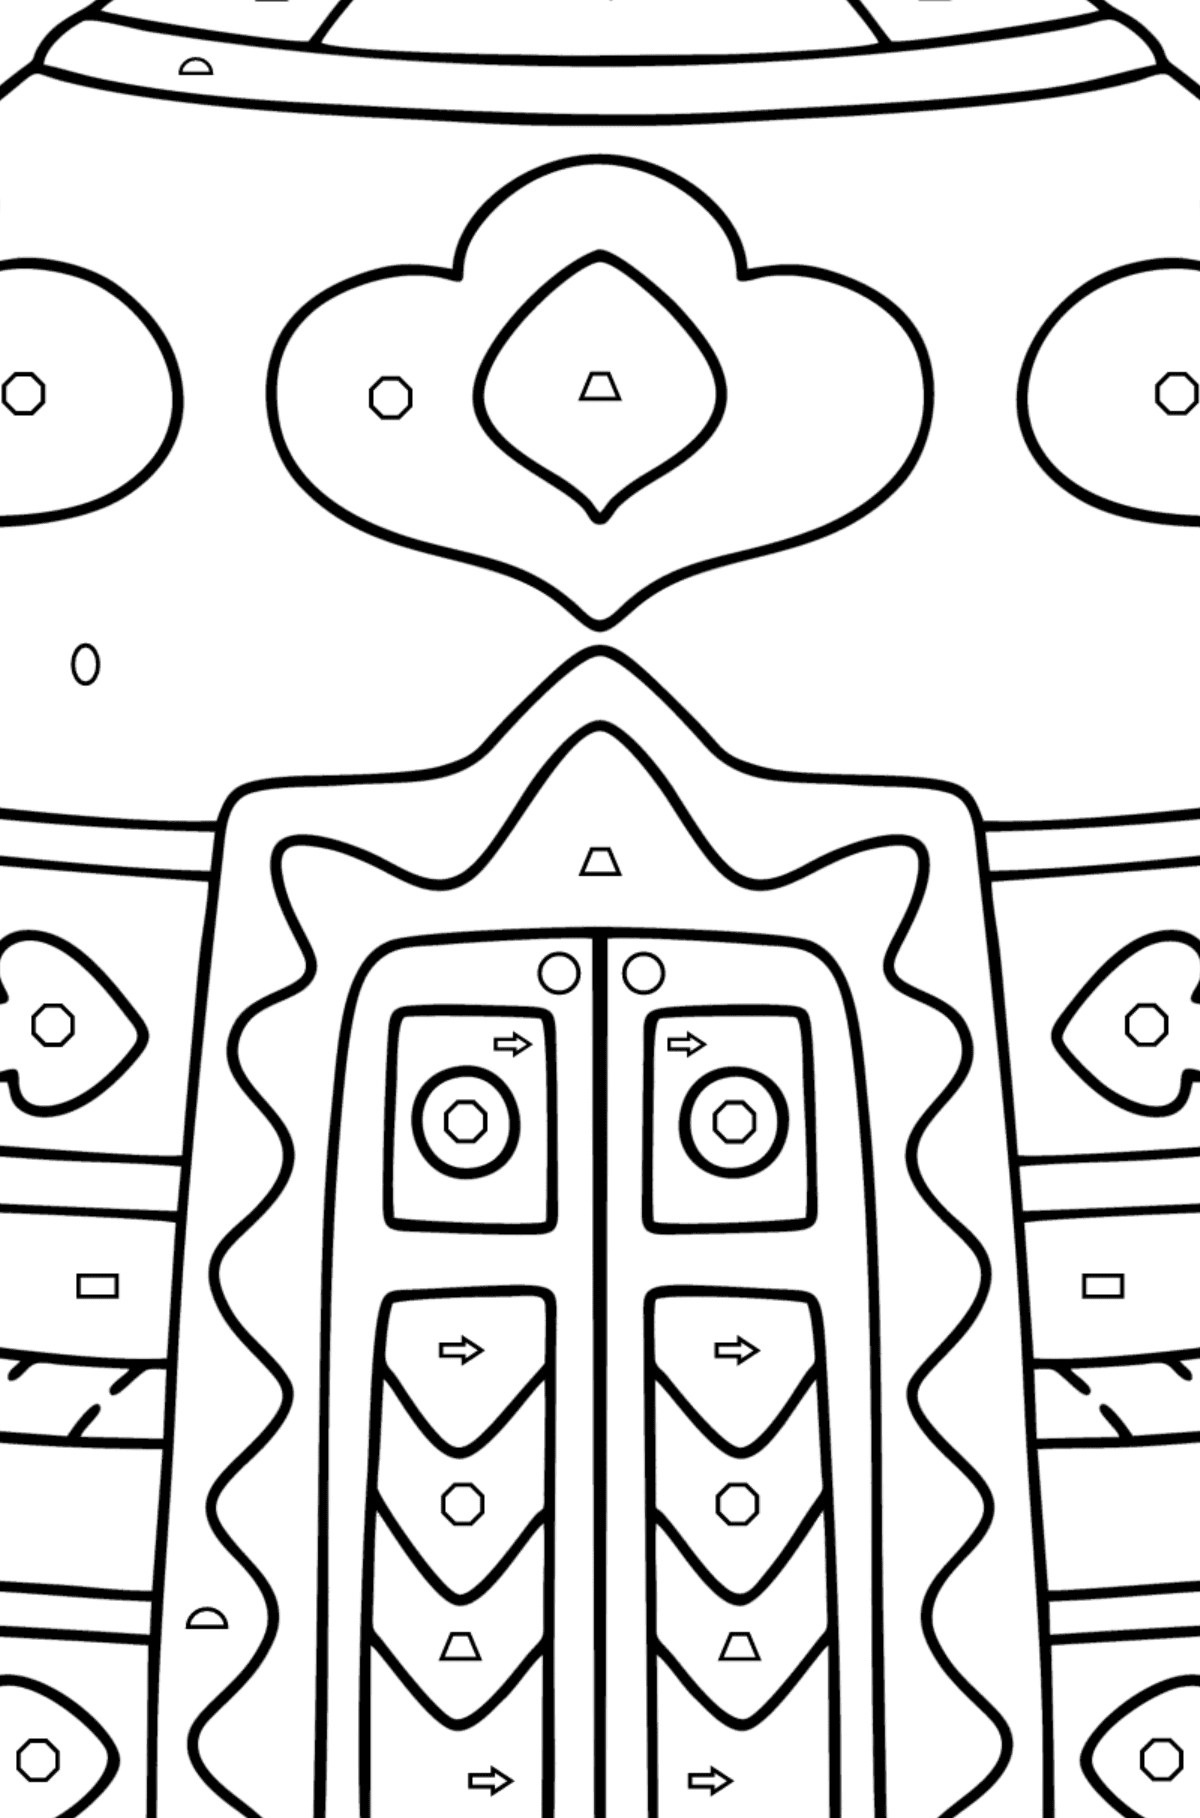 Yurt of nomad coloring page - Coloring by Geometric Shapes for Kids